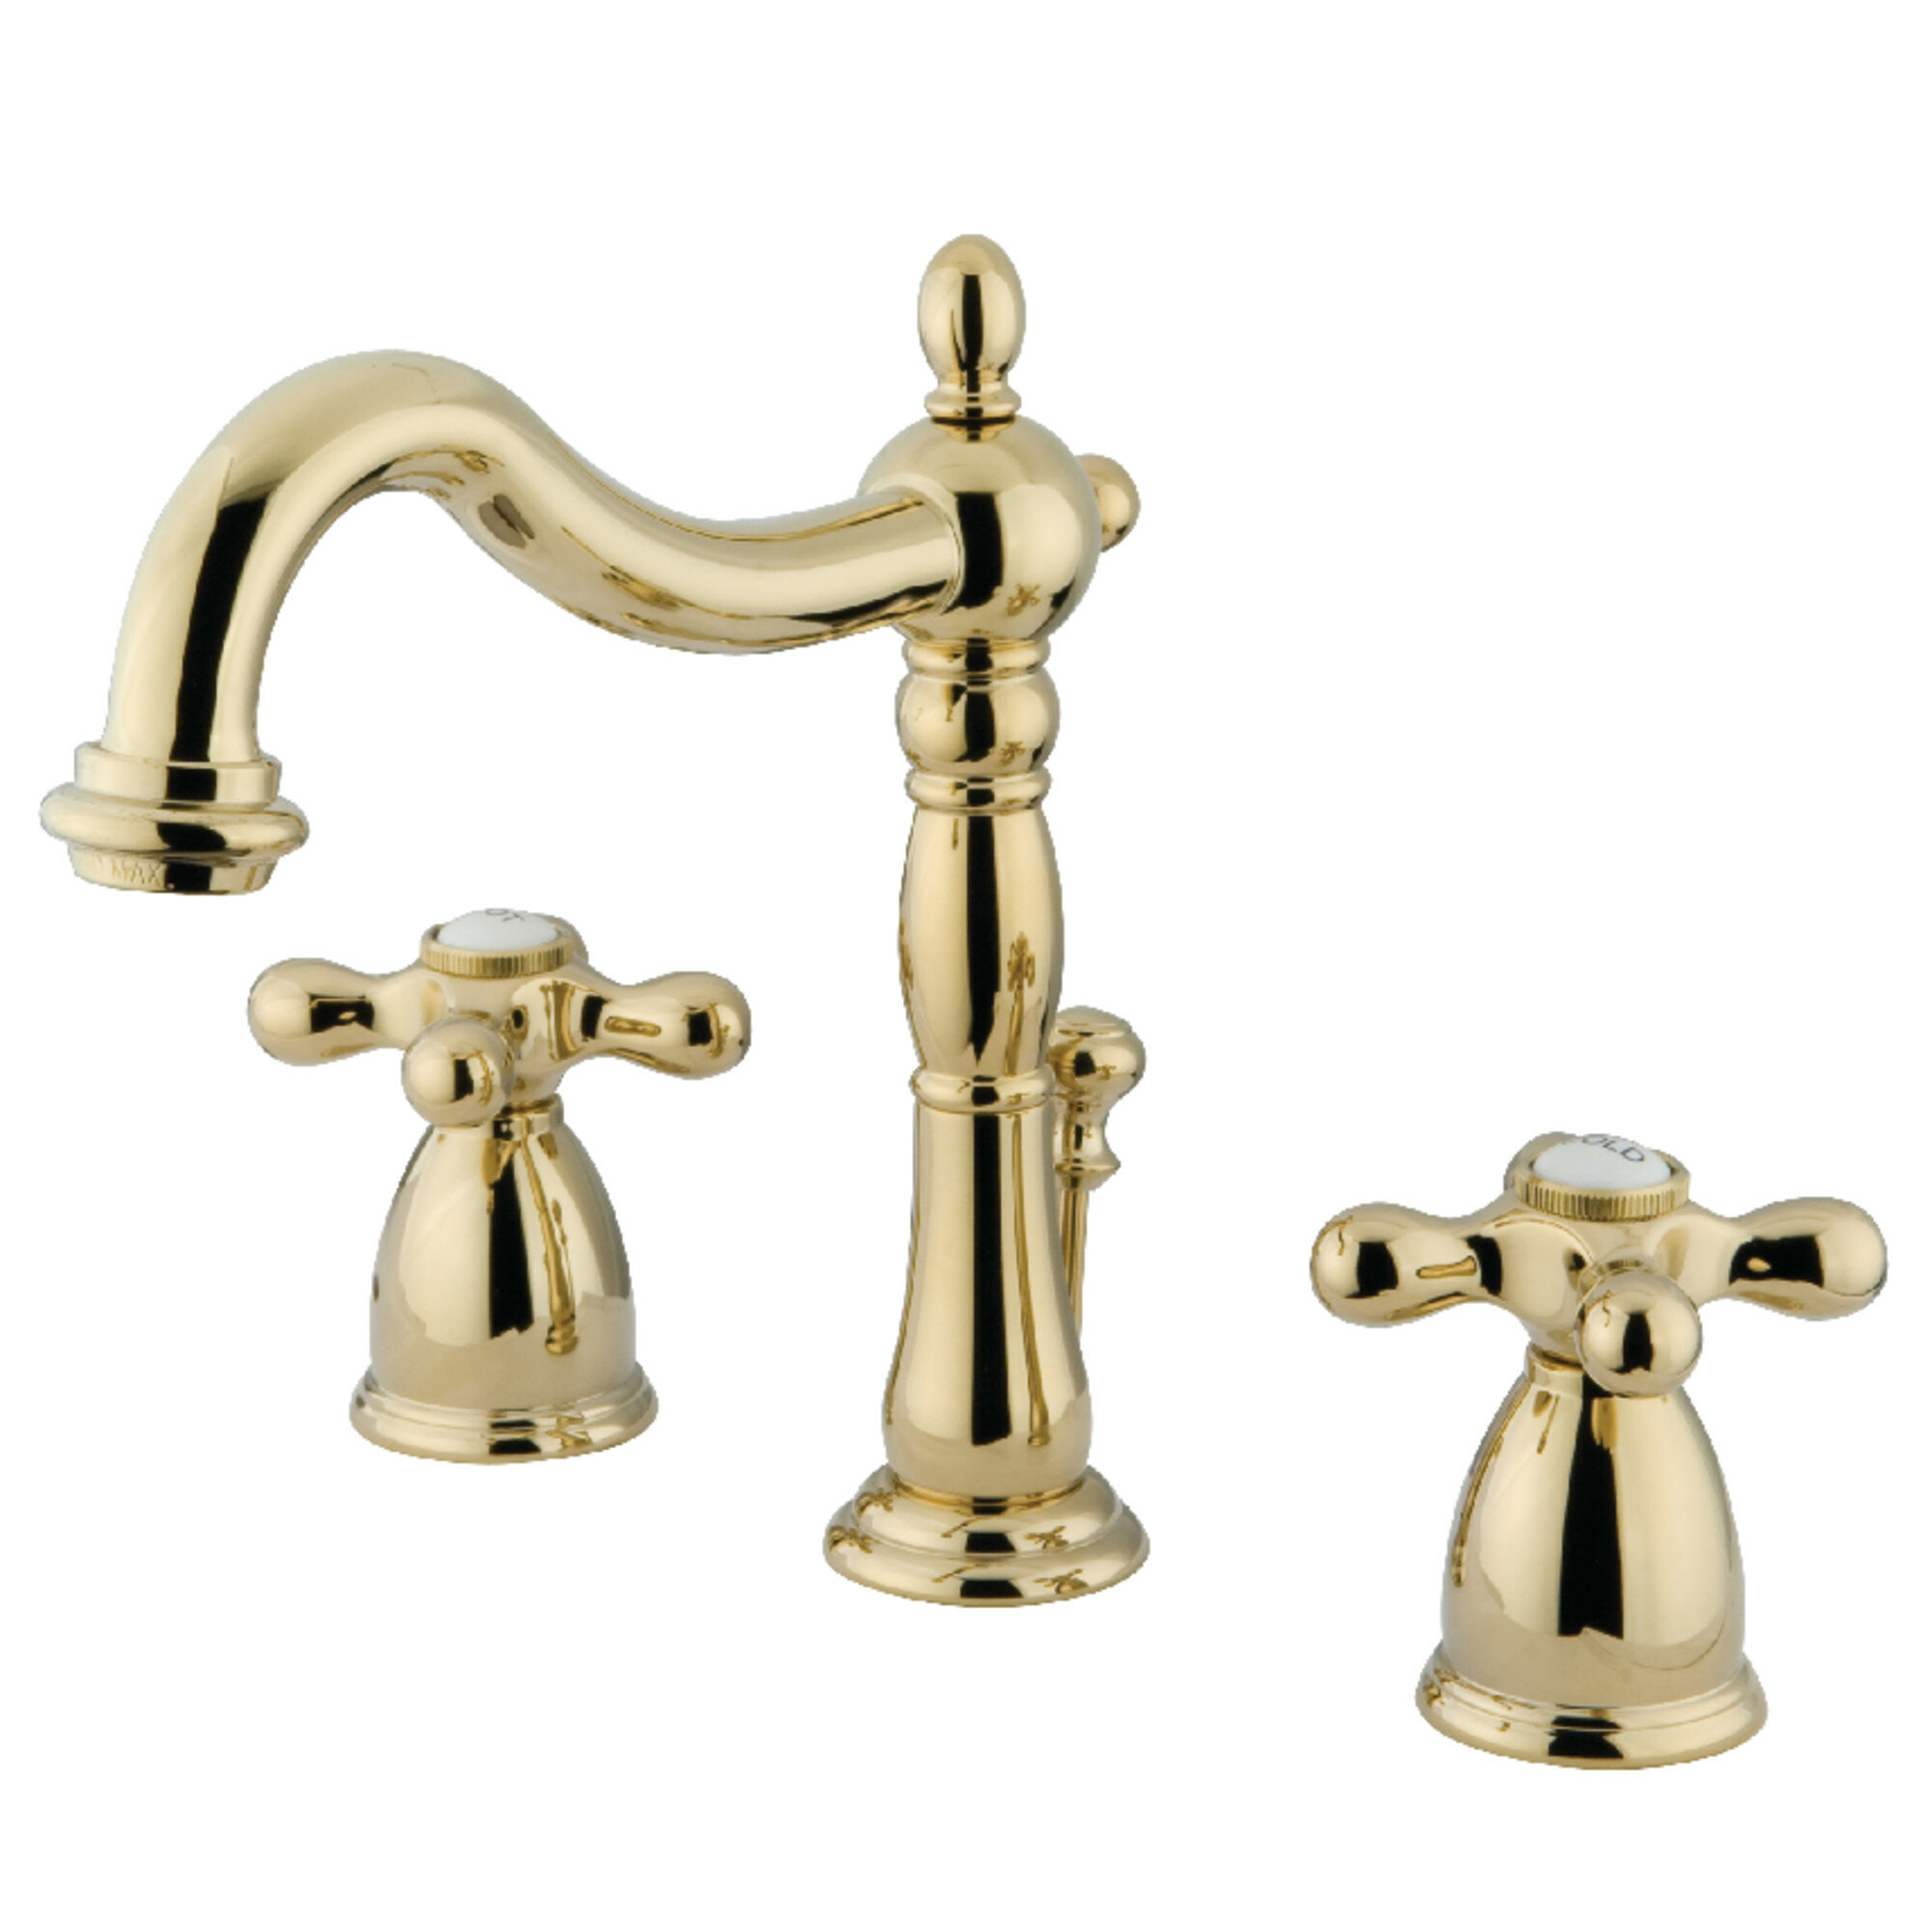 Elements Of Design Heritage Widespread Bathroom Faucet With Drain Assembly Reviews Wayfair